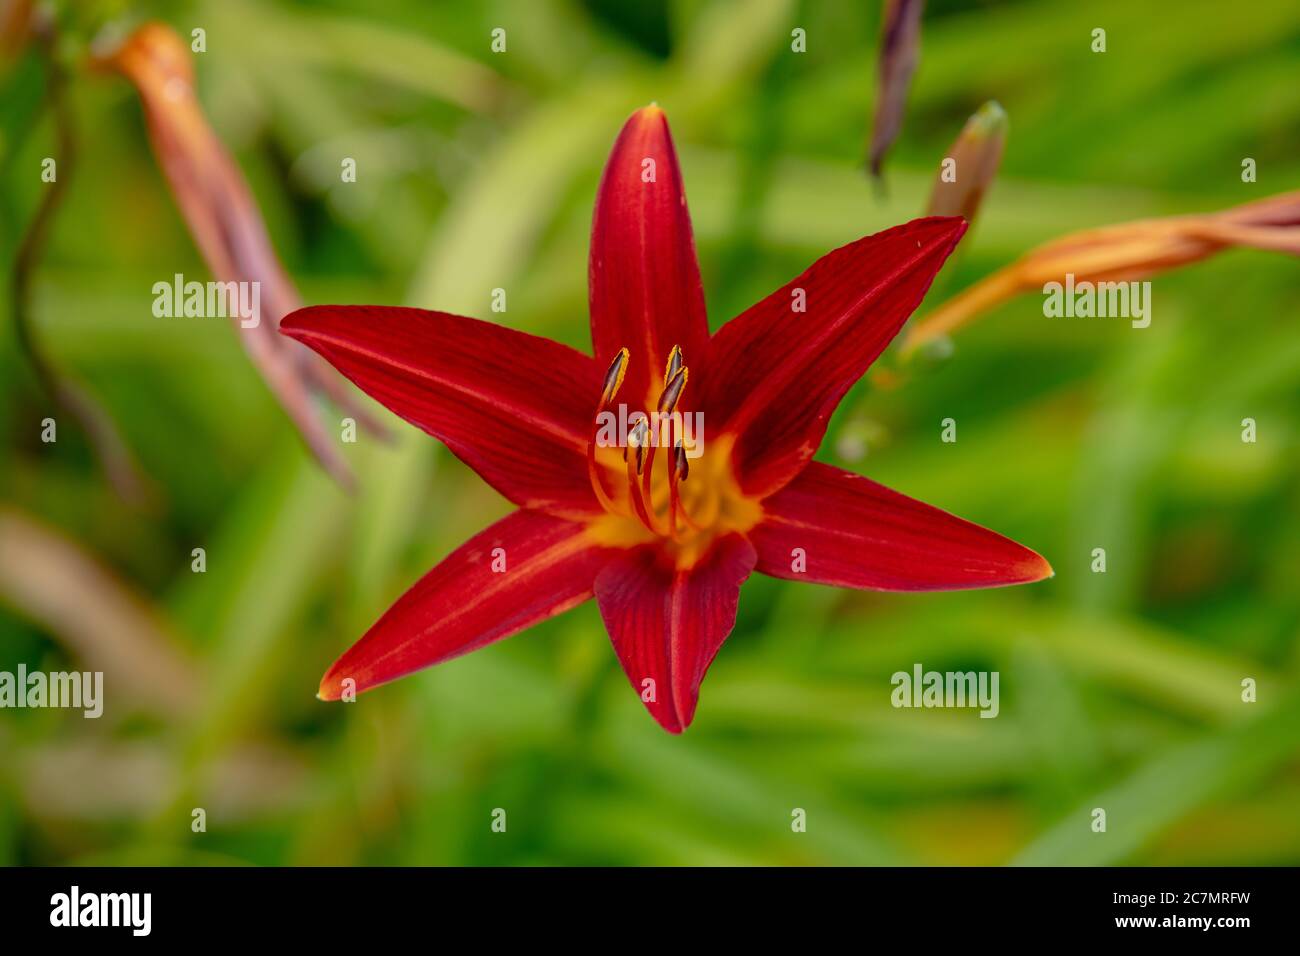 A close up of the strong red flower of Hemerocallis Stafford, flowering only for one day, seen in the garden in July. Stock Photo